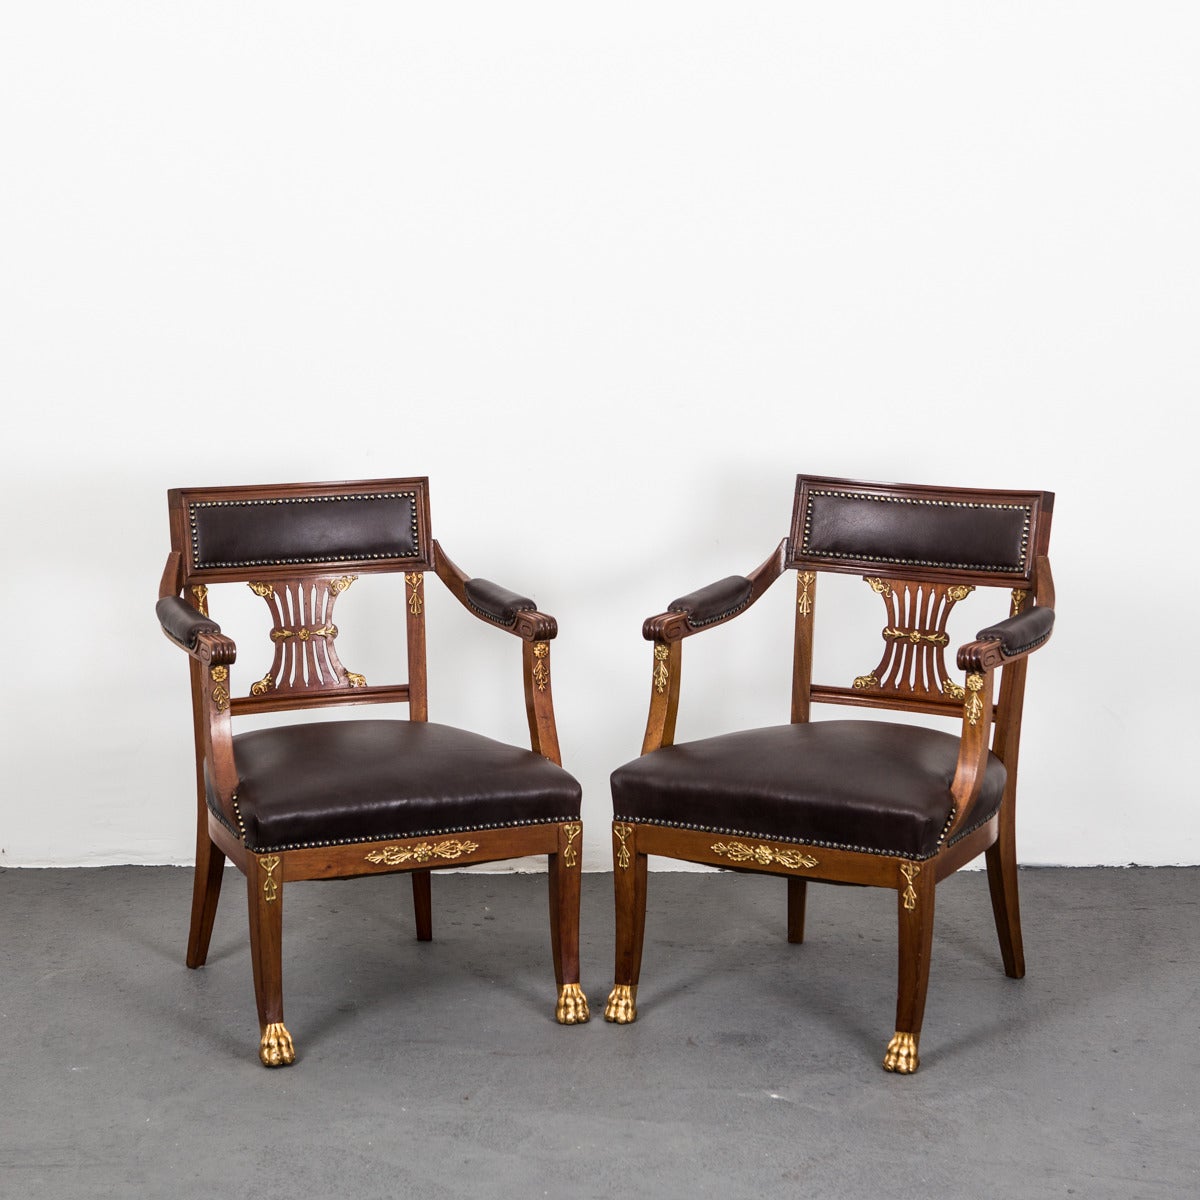 A pair of French desk chairs (can be sold separately as well) made in Mahogany and decorated with polished bronze details. Legs ending with lions feet. 
Upholstered in dark brown vintage leather.